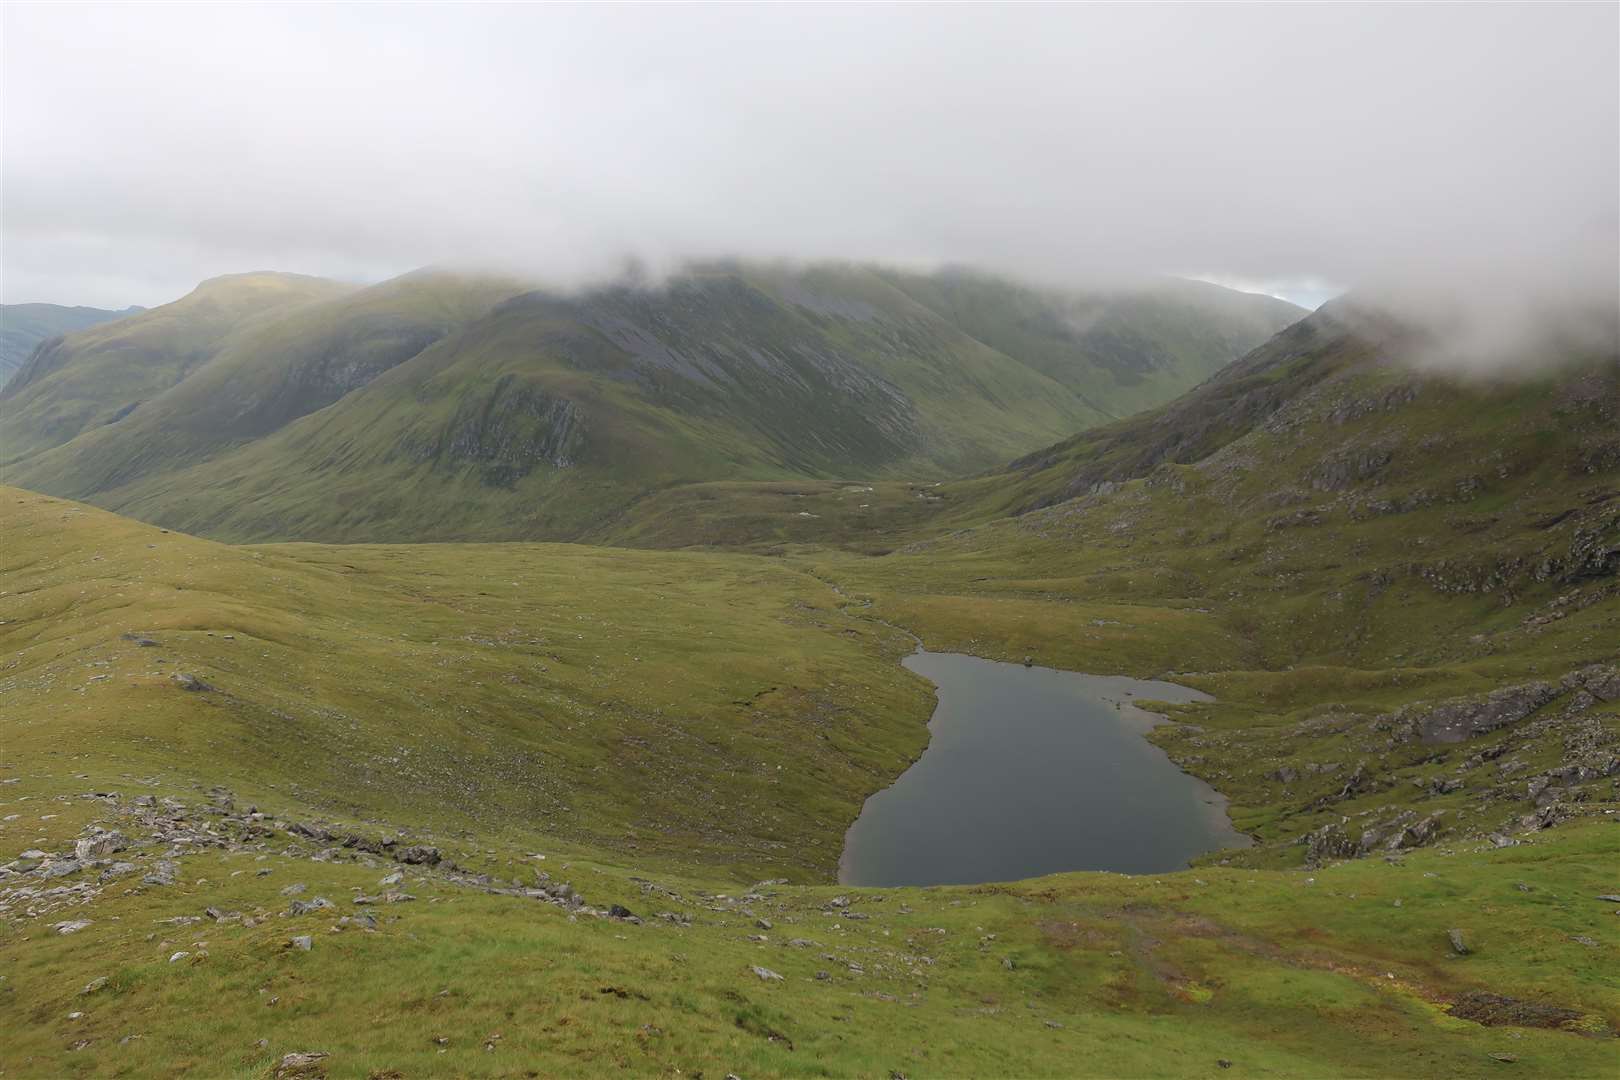 Lochan Gaineanhach in a hidden valley looking over to a cloud-shrouded Maoile Lunndaidh.